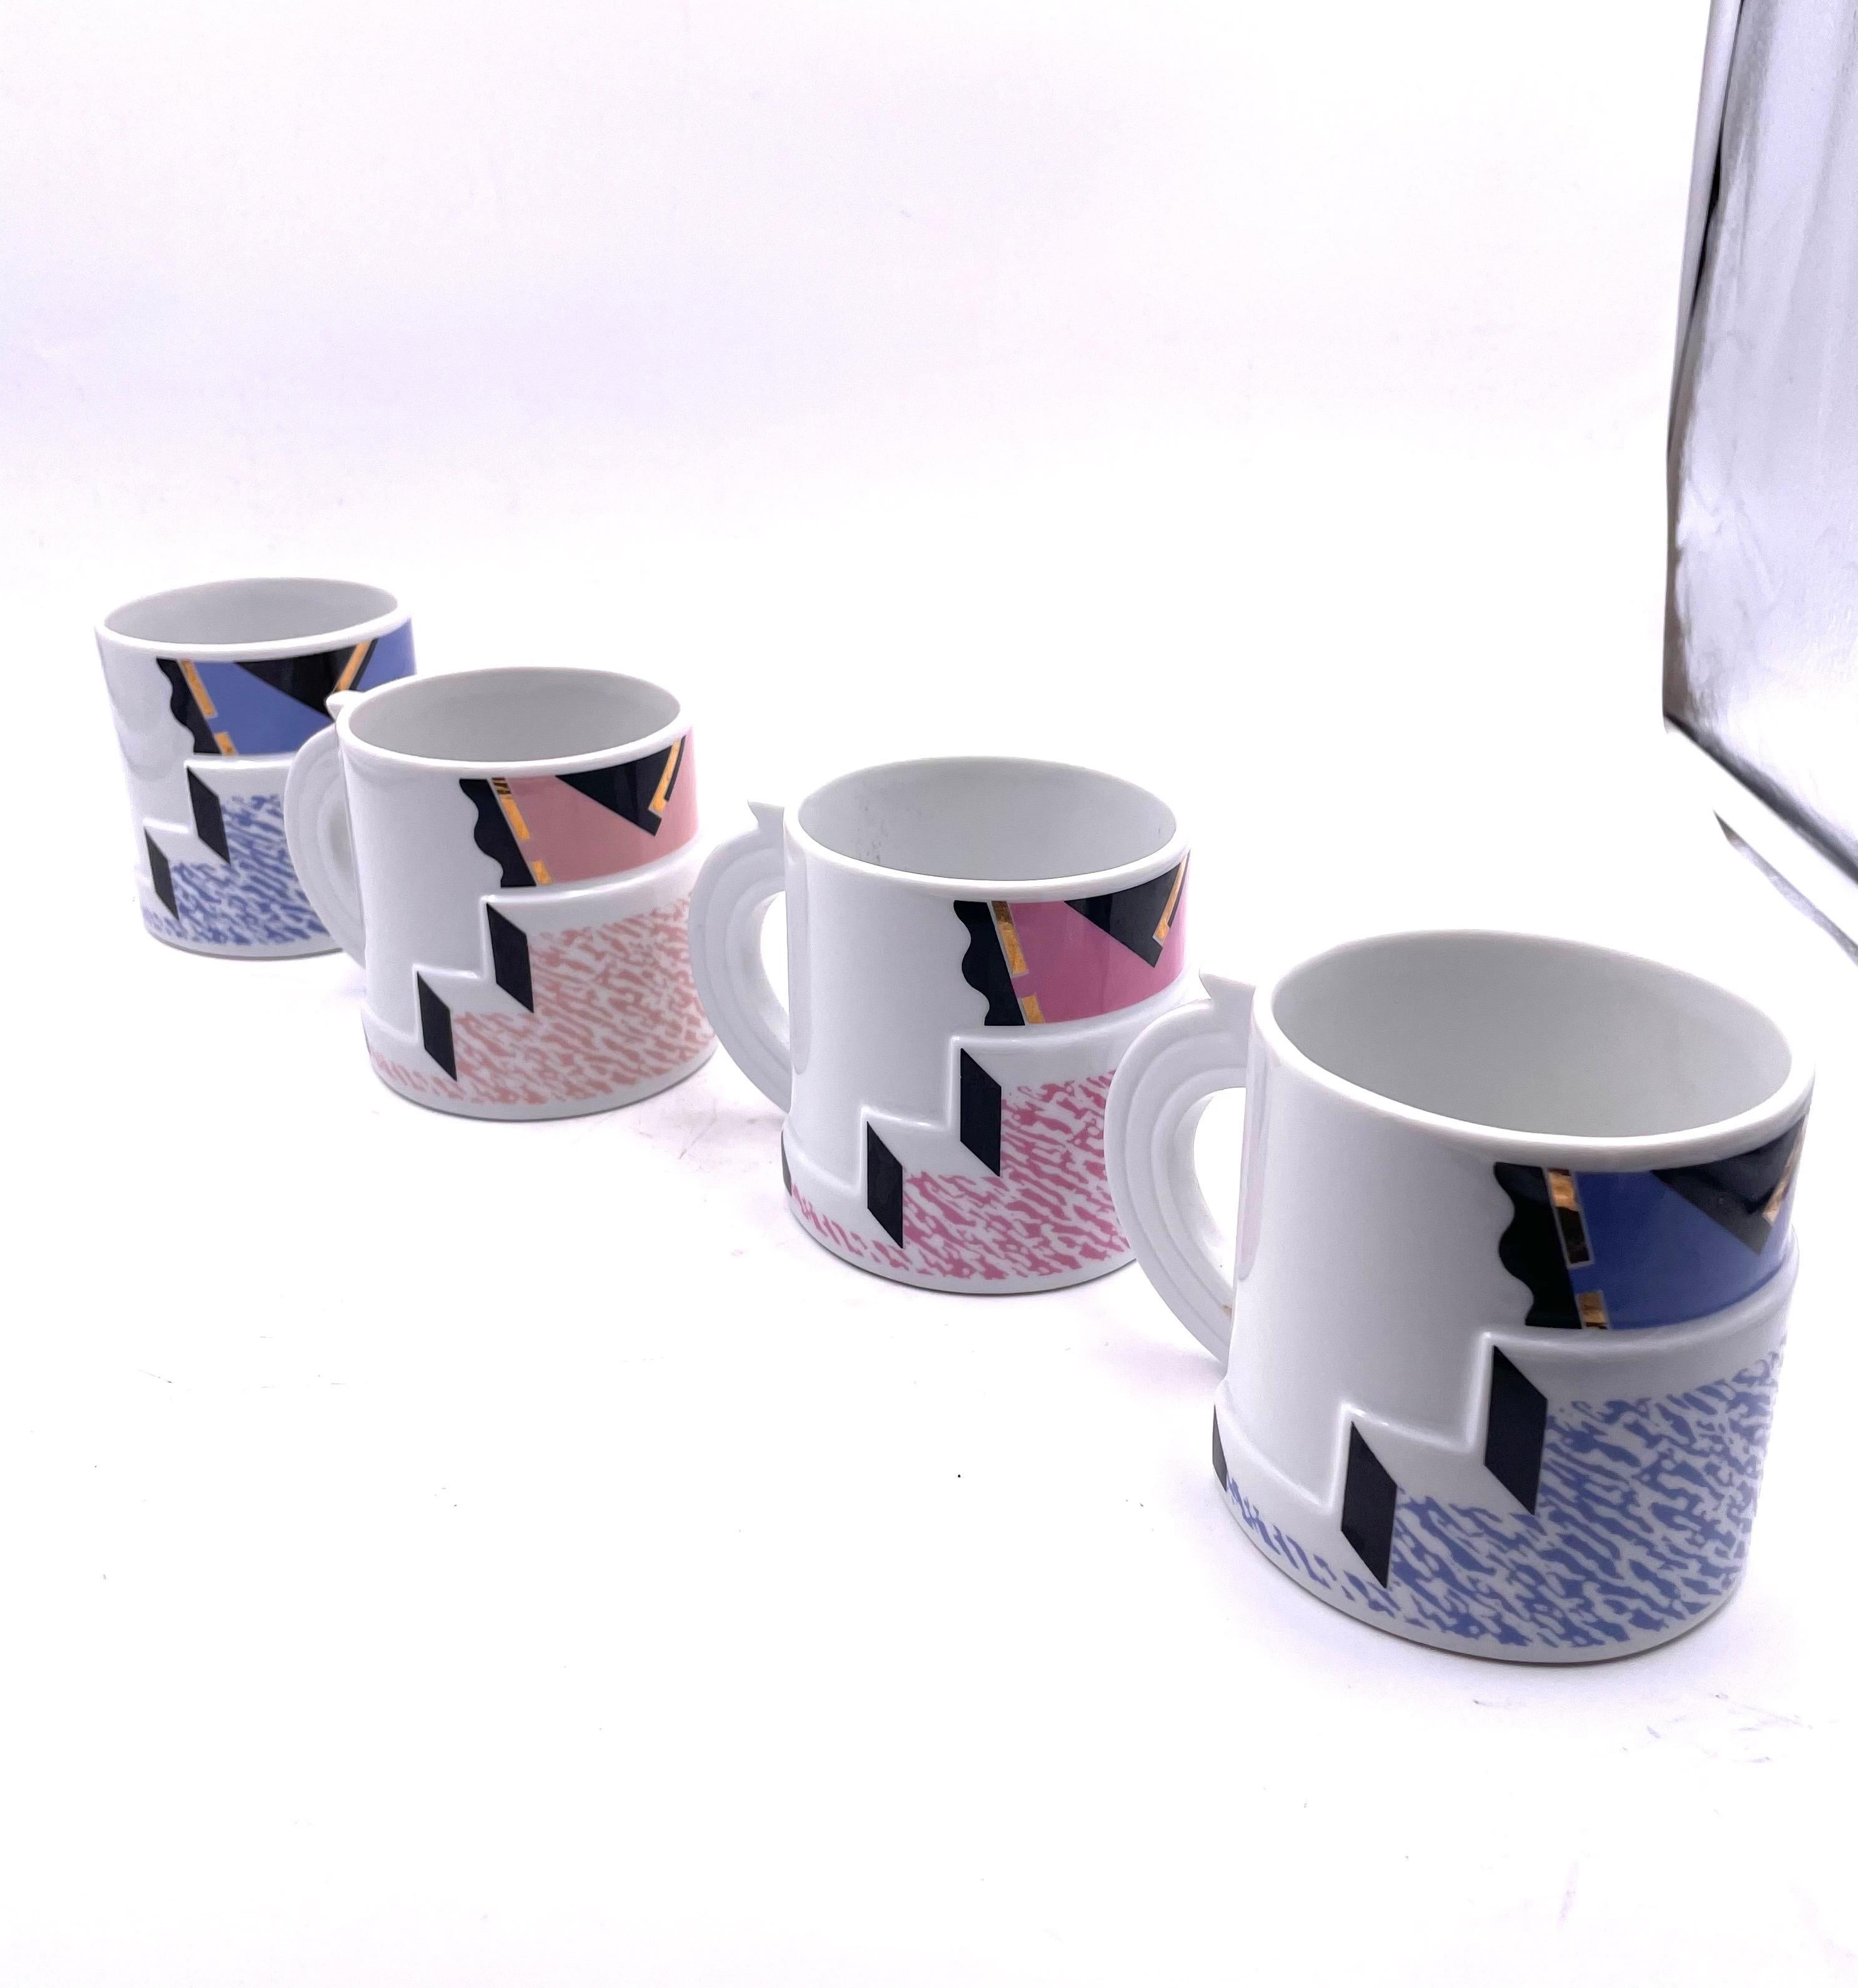 Great and rare set of 4 cups designed by Kato Kogei, Fujimori Progression Collection, an original condition some wear due to use no chips or cracks circa the 1980s, Memphis.